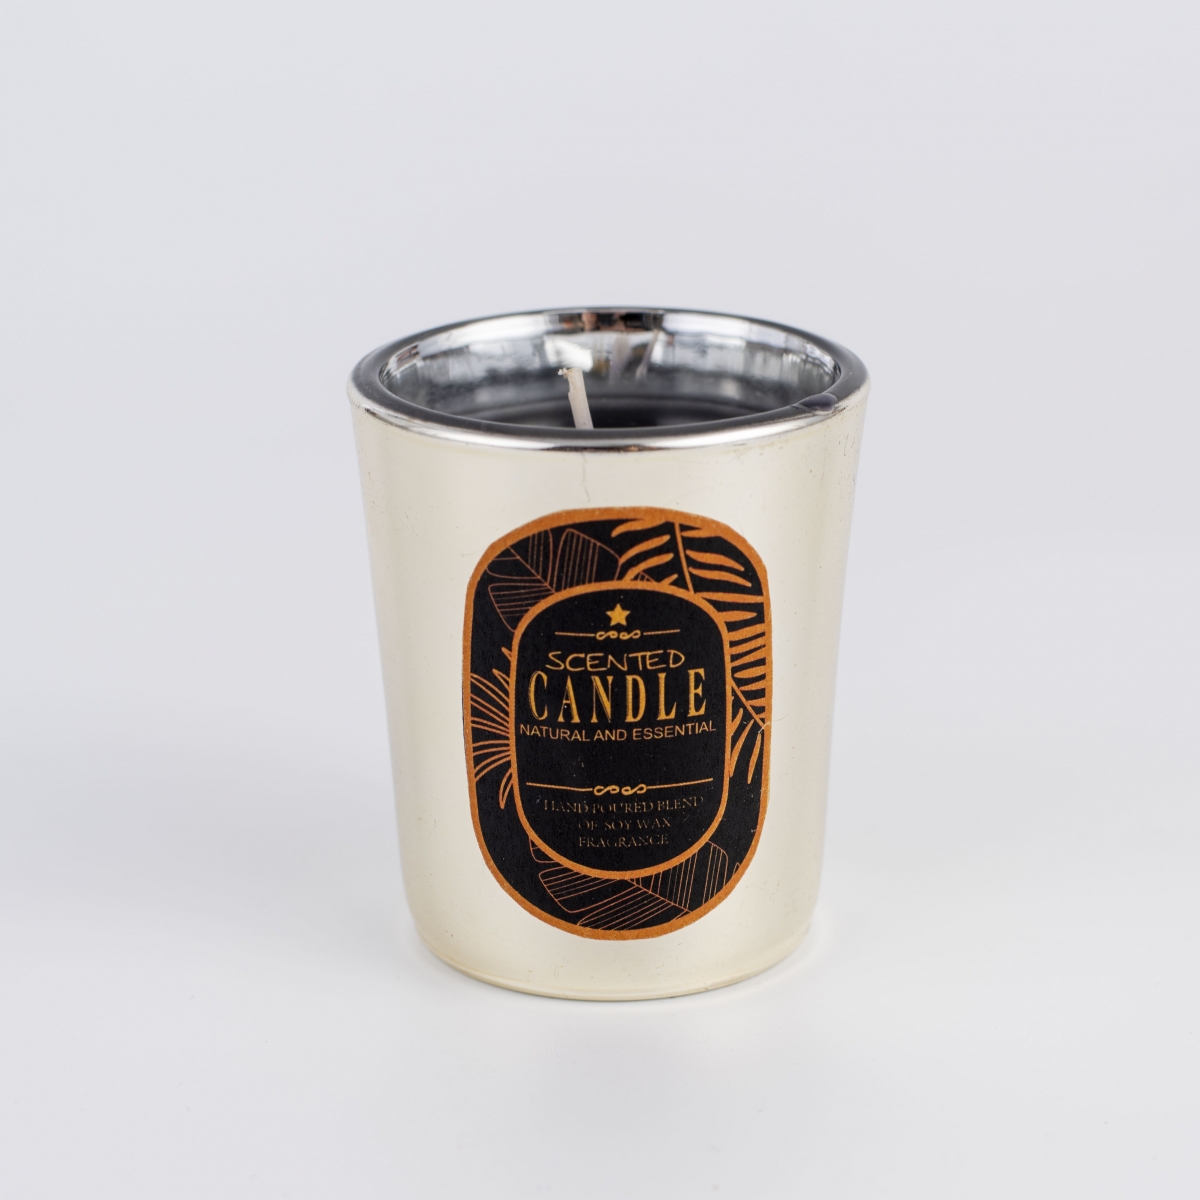 Black Scented Candles -Best Soy Wax ,Small Candles ,Private Label ,China Factory ,Price-HOWCANDLE-Candles,Scented Candles,Aromatherapy Candles,Soy Candles,Vegan Candles,Jar Candles,Pillar Candles,Candle Gift Sets,Essential Oils,Reed Diffuser,Candle Holder,